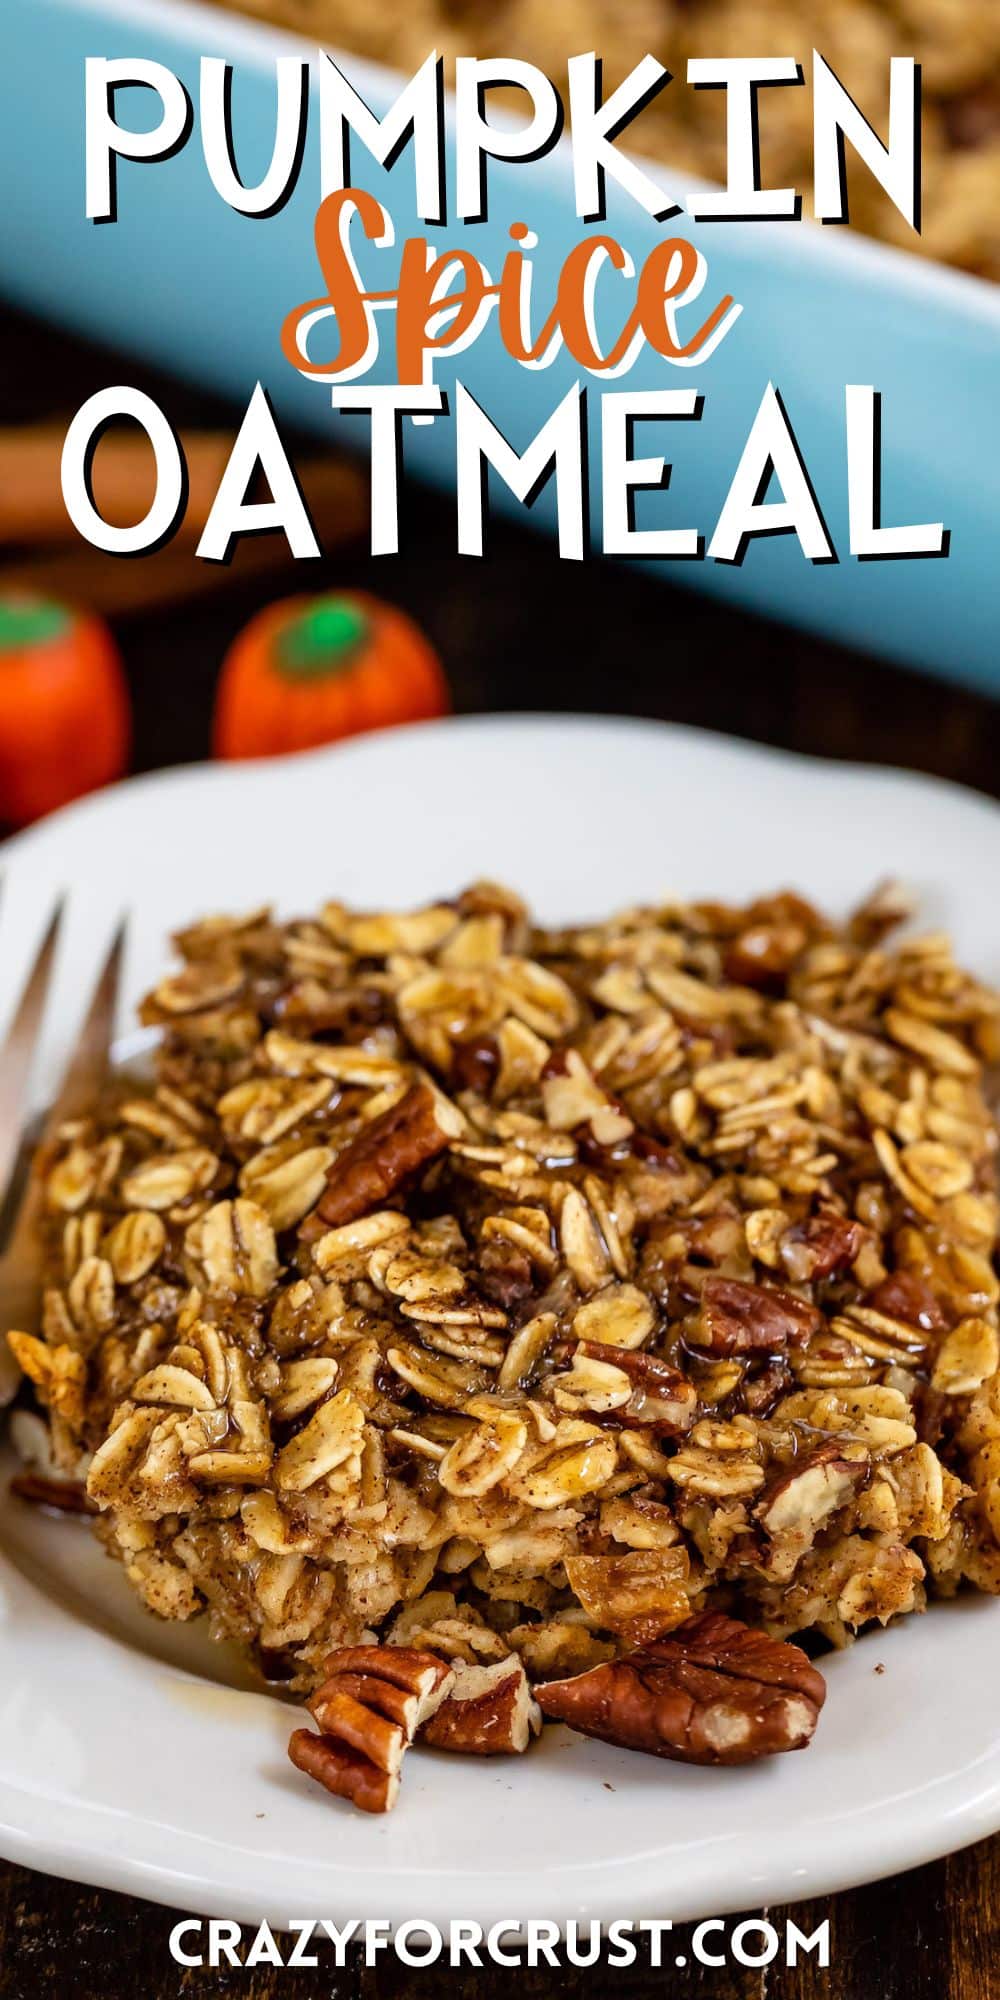 baked oatmeal on a white plate with words on the image.